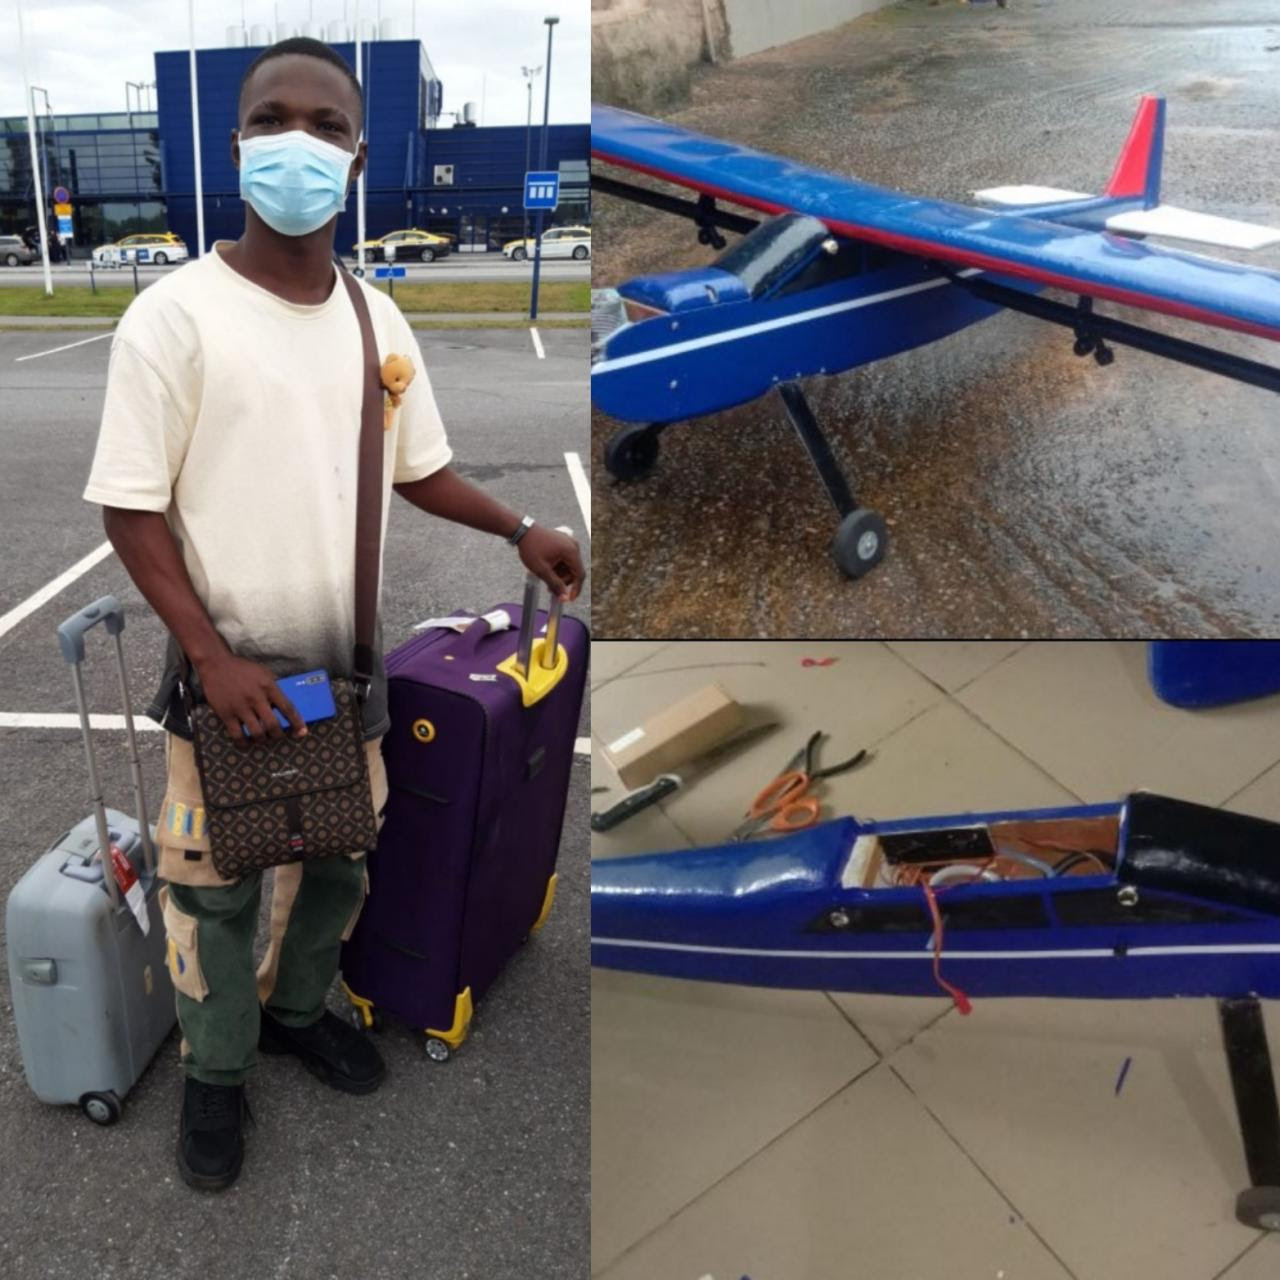 Foreign company flies Nigerian man who makes drones to Finland for immediate employment 